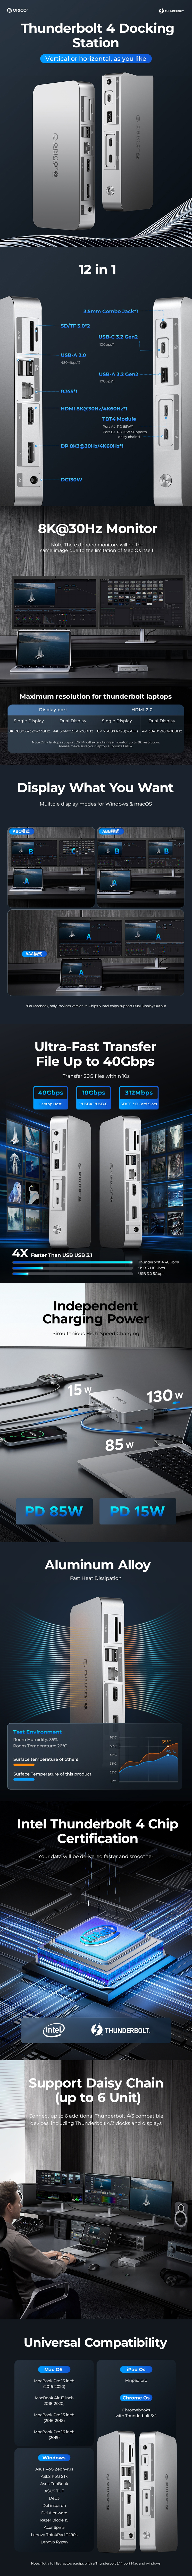 A large marketing image providing additional information about the product ORICO 12 in 1 Thunderbolt 4 Docking Station - Additional alt info not provided